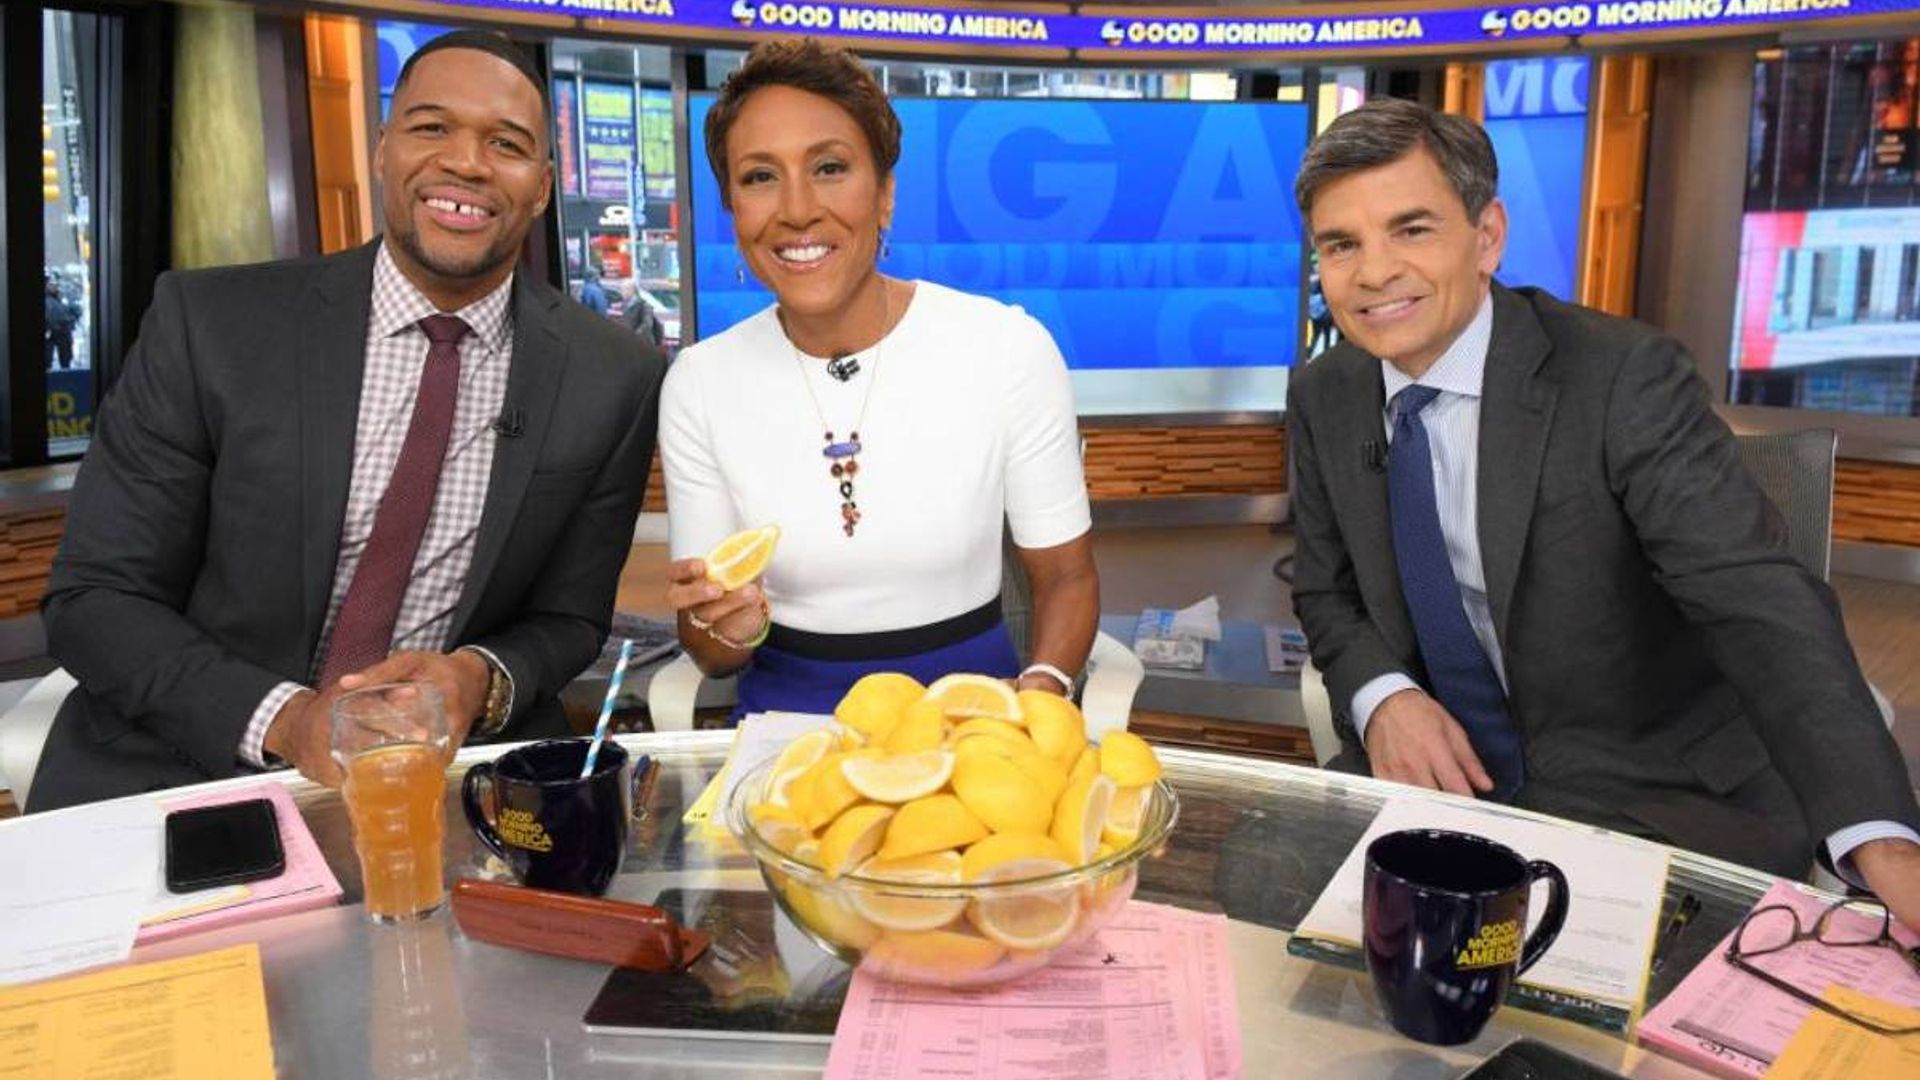 Michael Strahan Leaving Gma And Co Hosts In Ny For Extraordinary New Career Venture Hello 